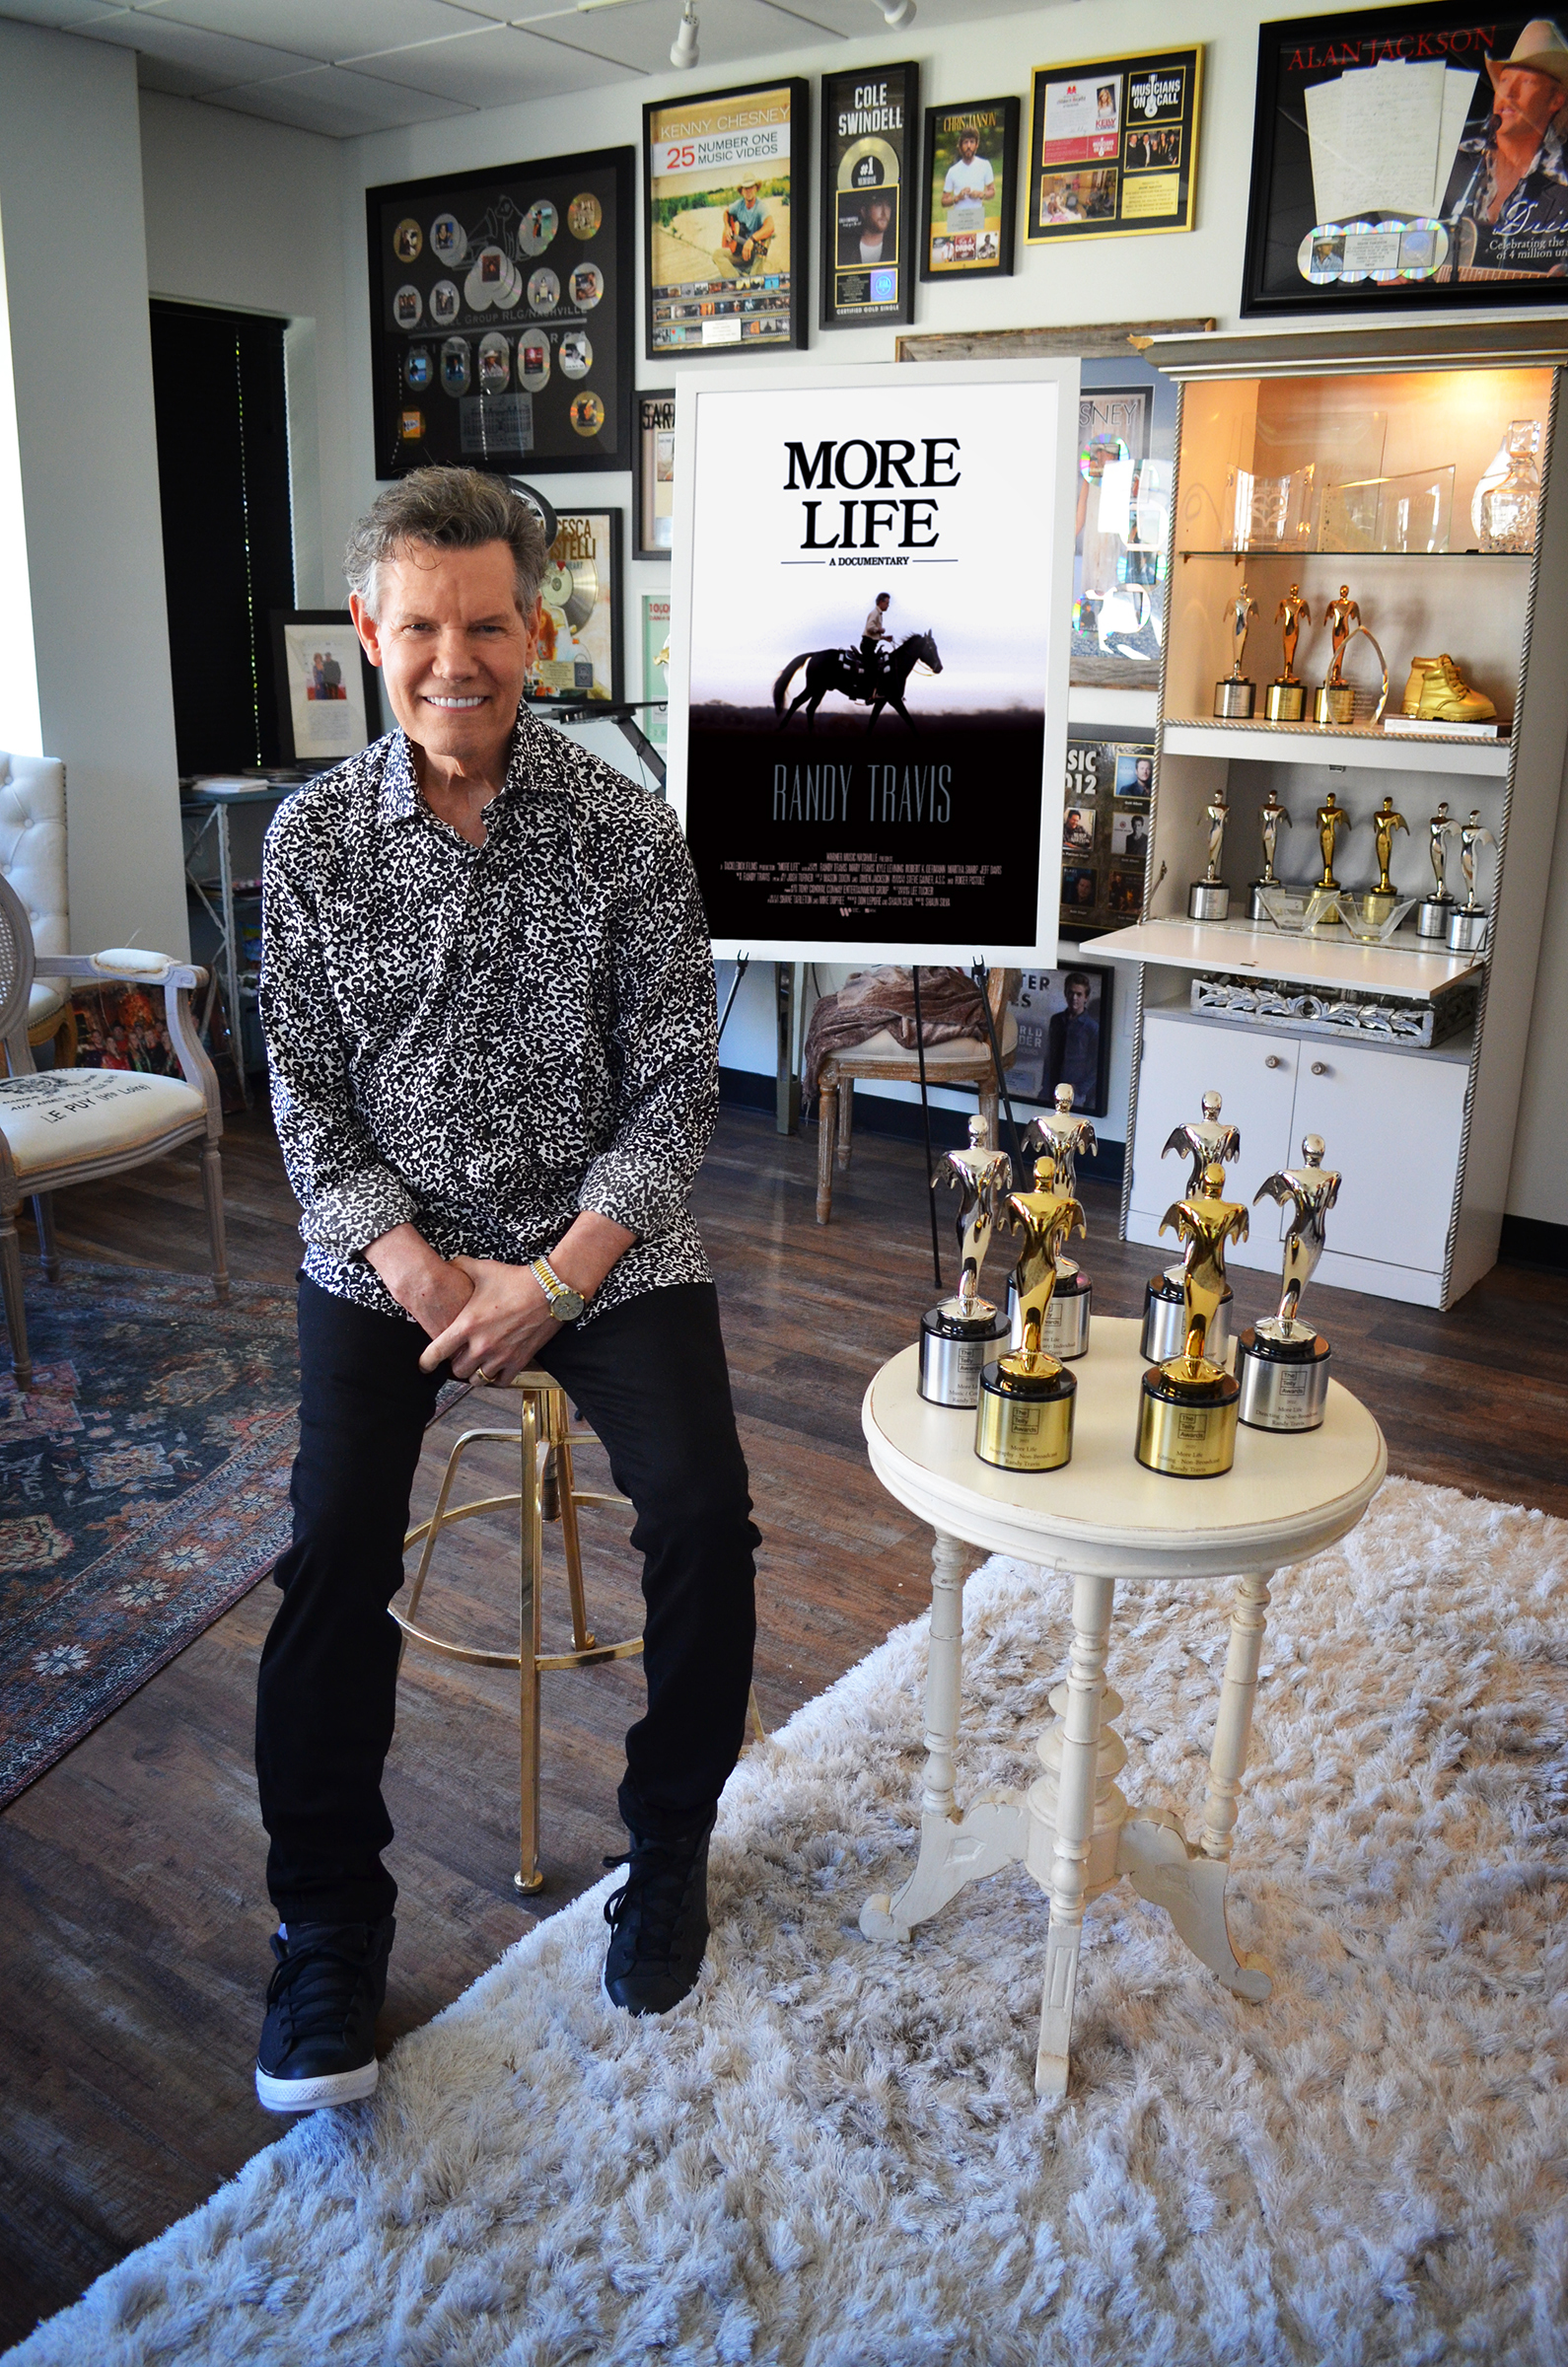 RANDY TRAVIS' ACCLAIMED DOCUMENTARY "MORE LIFE" WINS SIX TELLY AWARDS